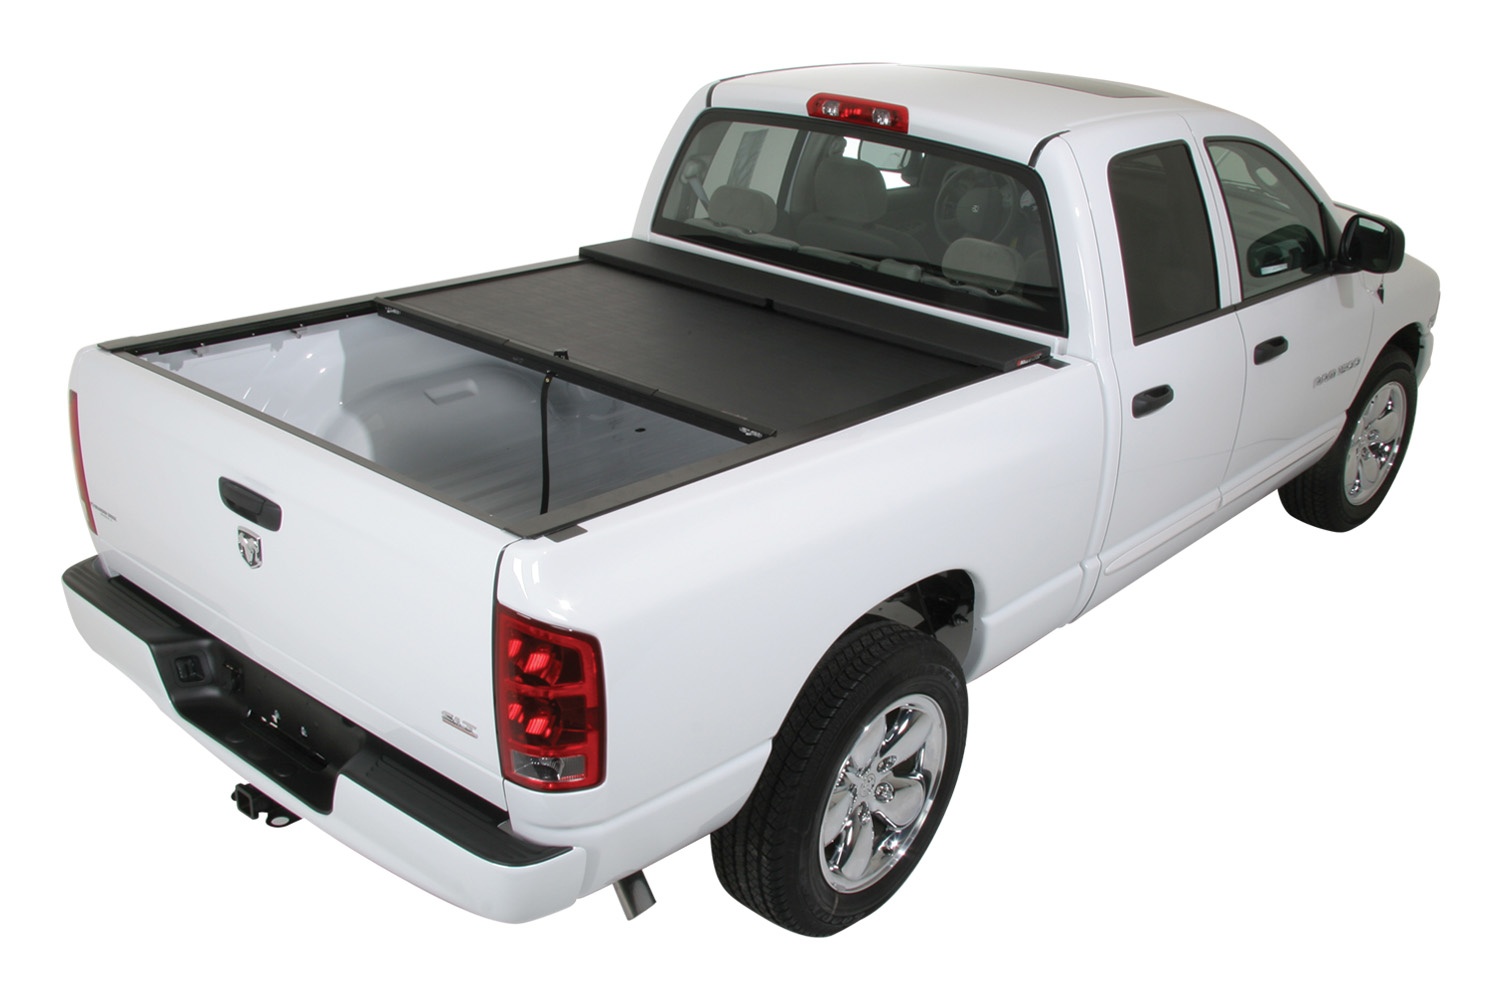 LG455M M-Series Locking Retractable Truck Bed Cover for 2002-2008 Dodge Ram 1500, 2003-2009 Ram 2500/3500 [8 ft. Bed]